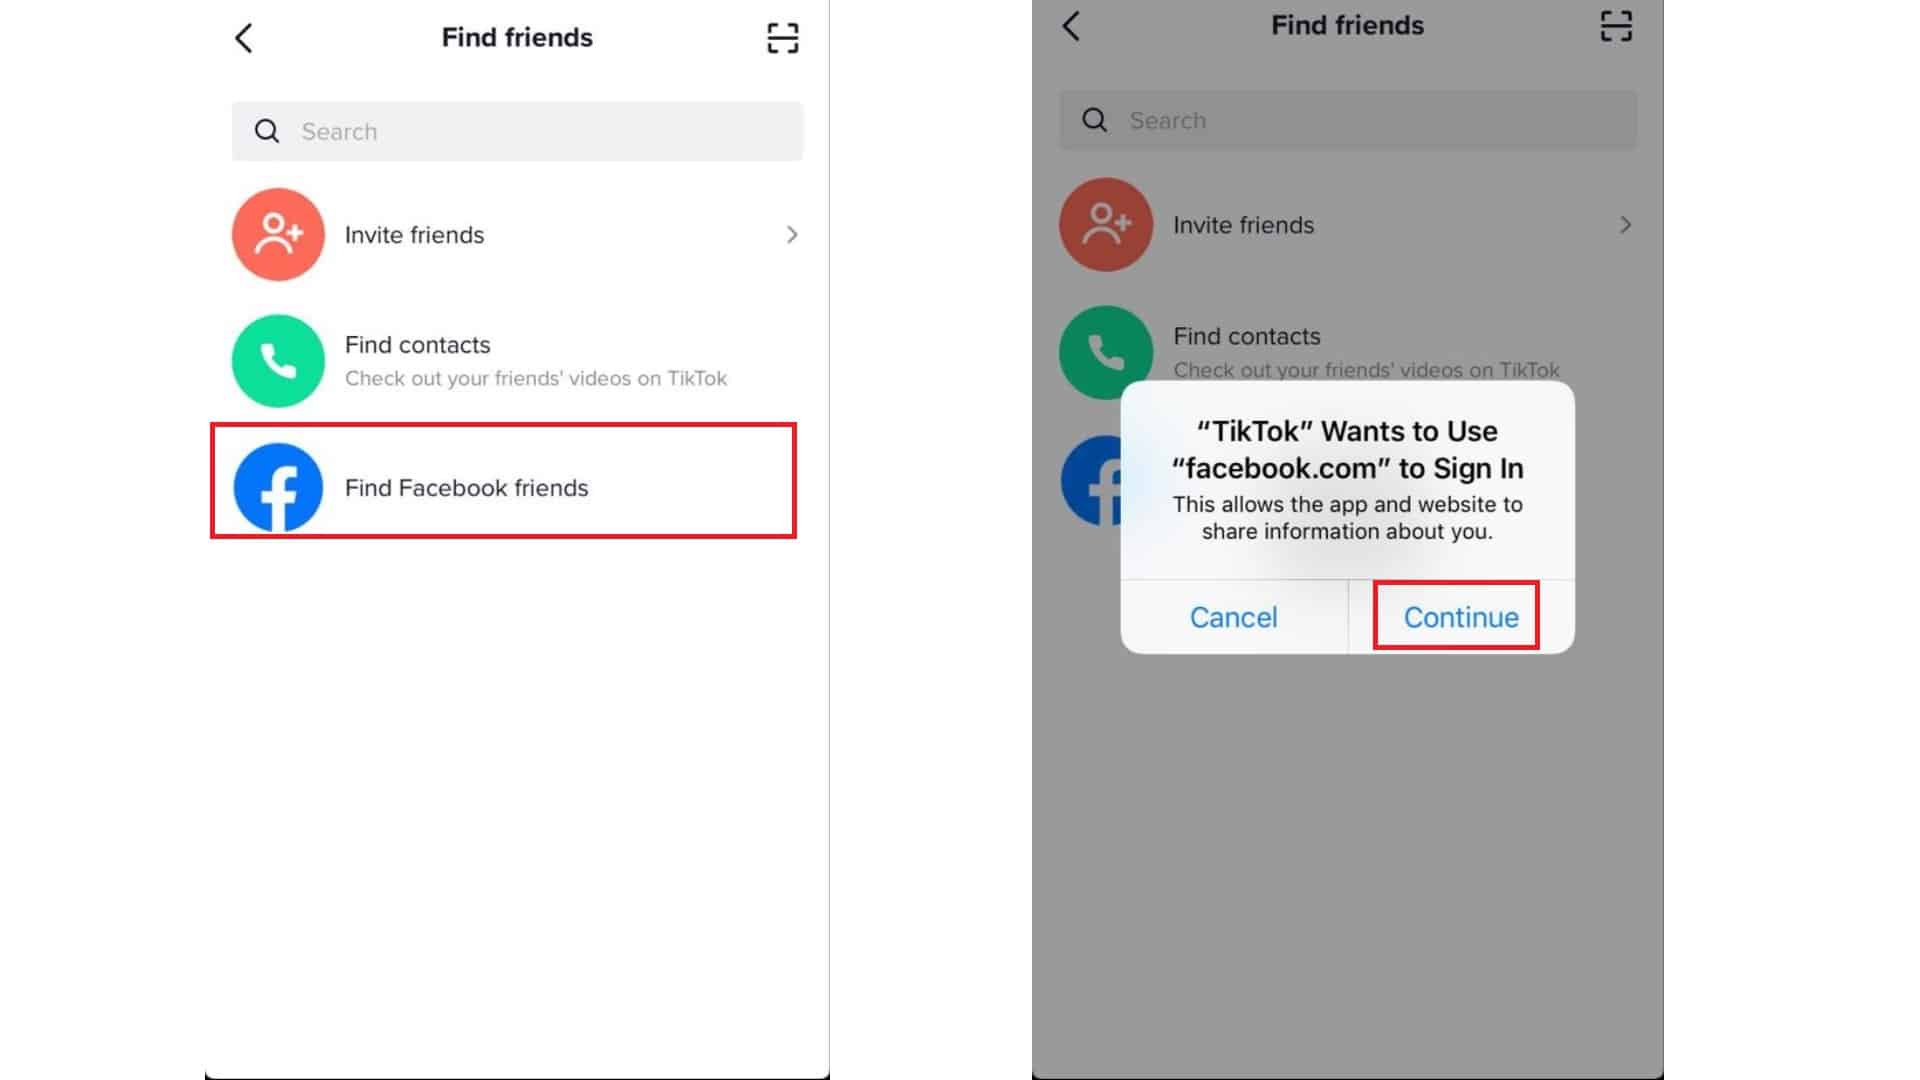 How-to-Invite-Facebook-Friends-on-iPhone-TikTok-App-2020-guide